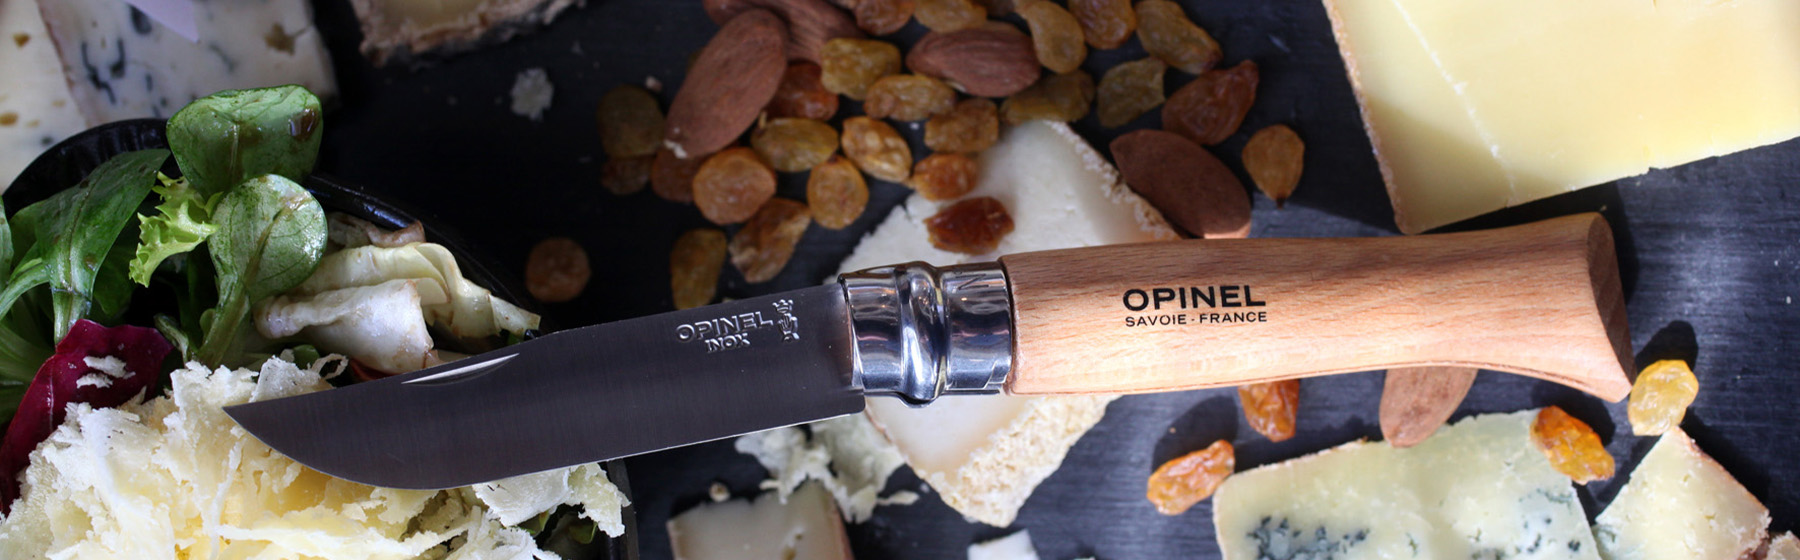 On-the-go meal kit  Monbento x Opinel - OPINEL USA